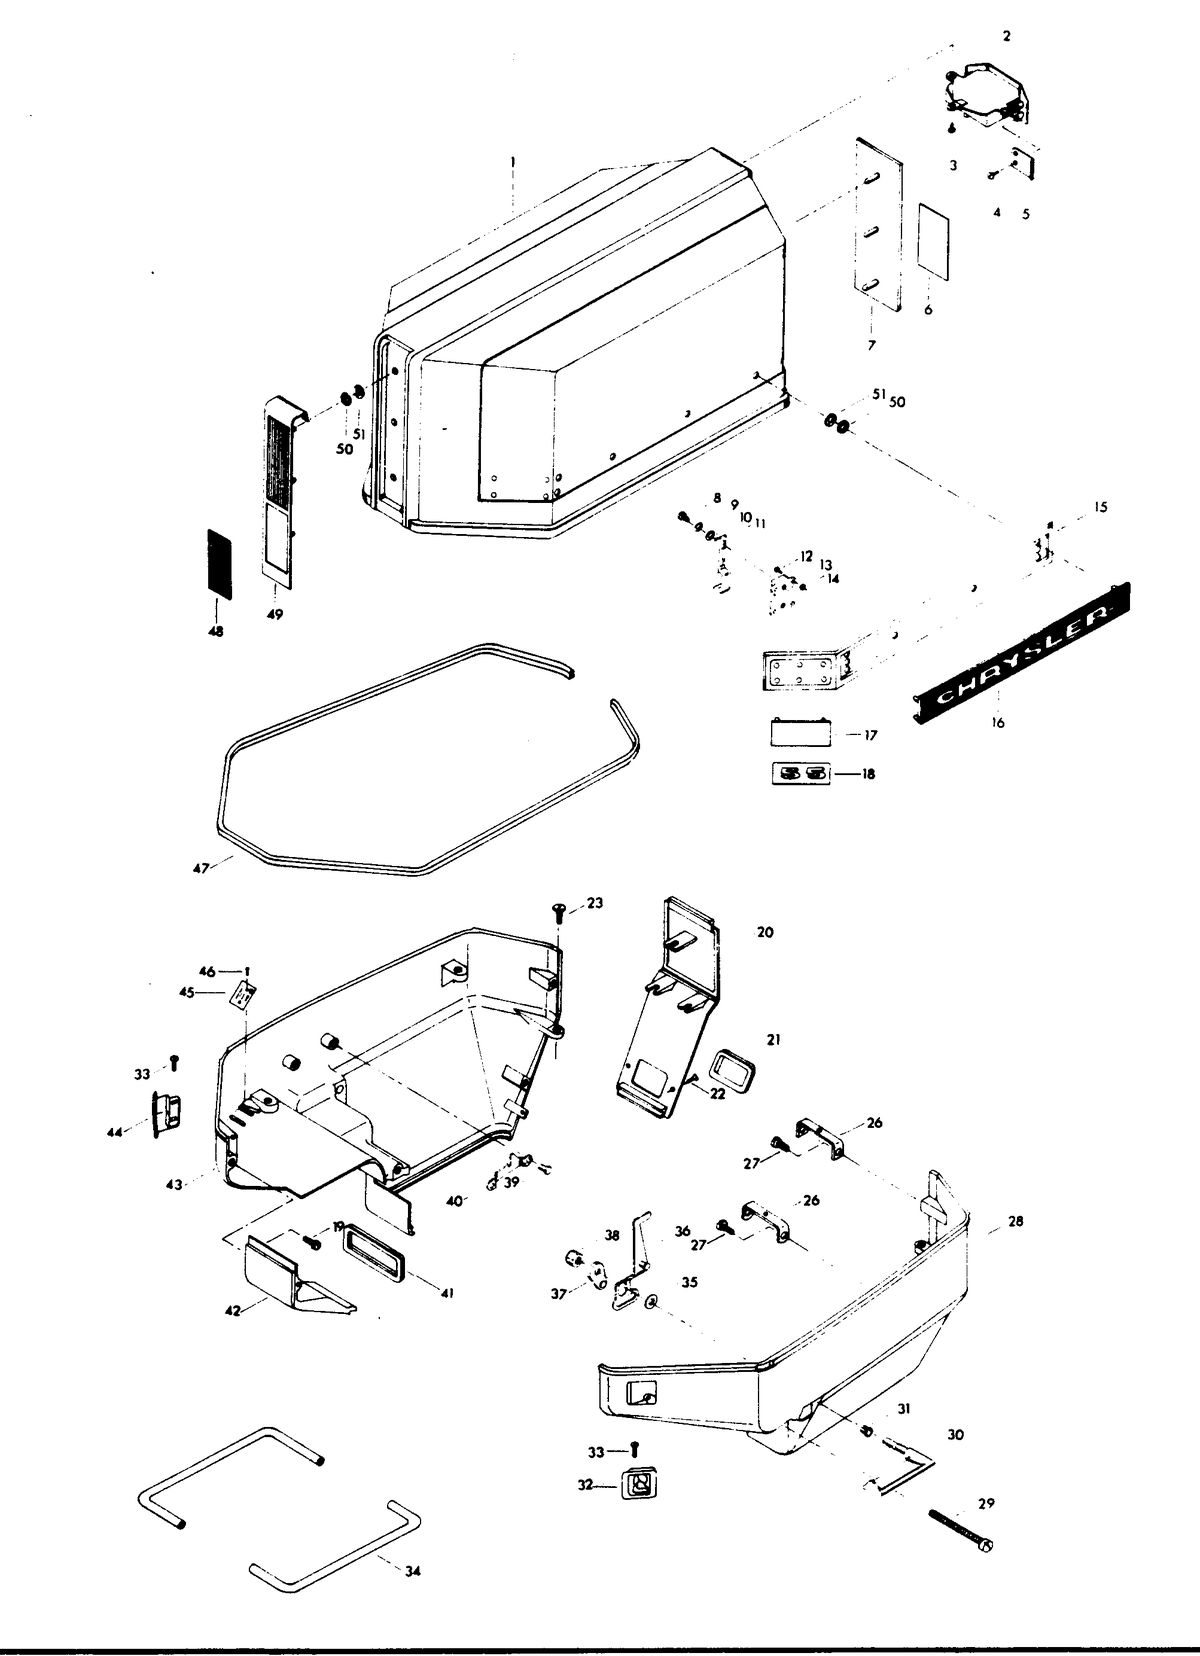 CHRYSLER 55 H.P. ENGINE COVER AND SUPPORT PLATE